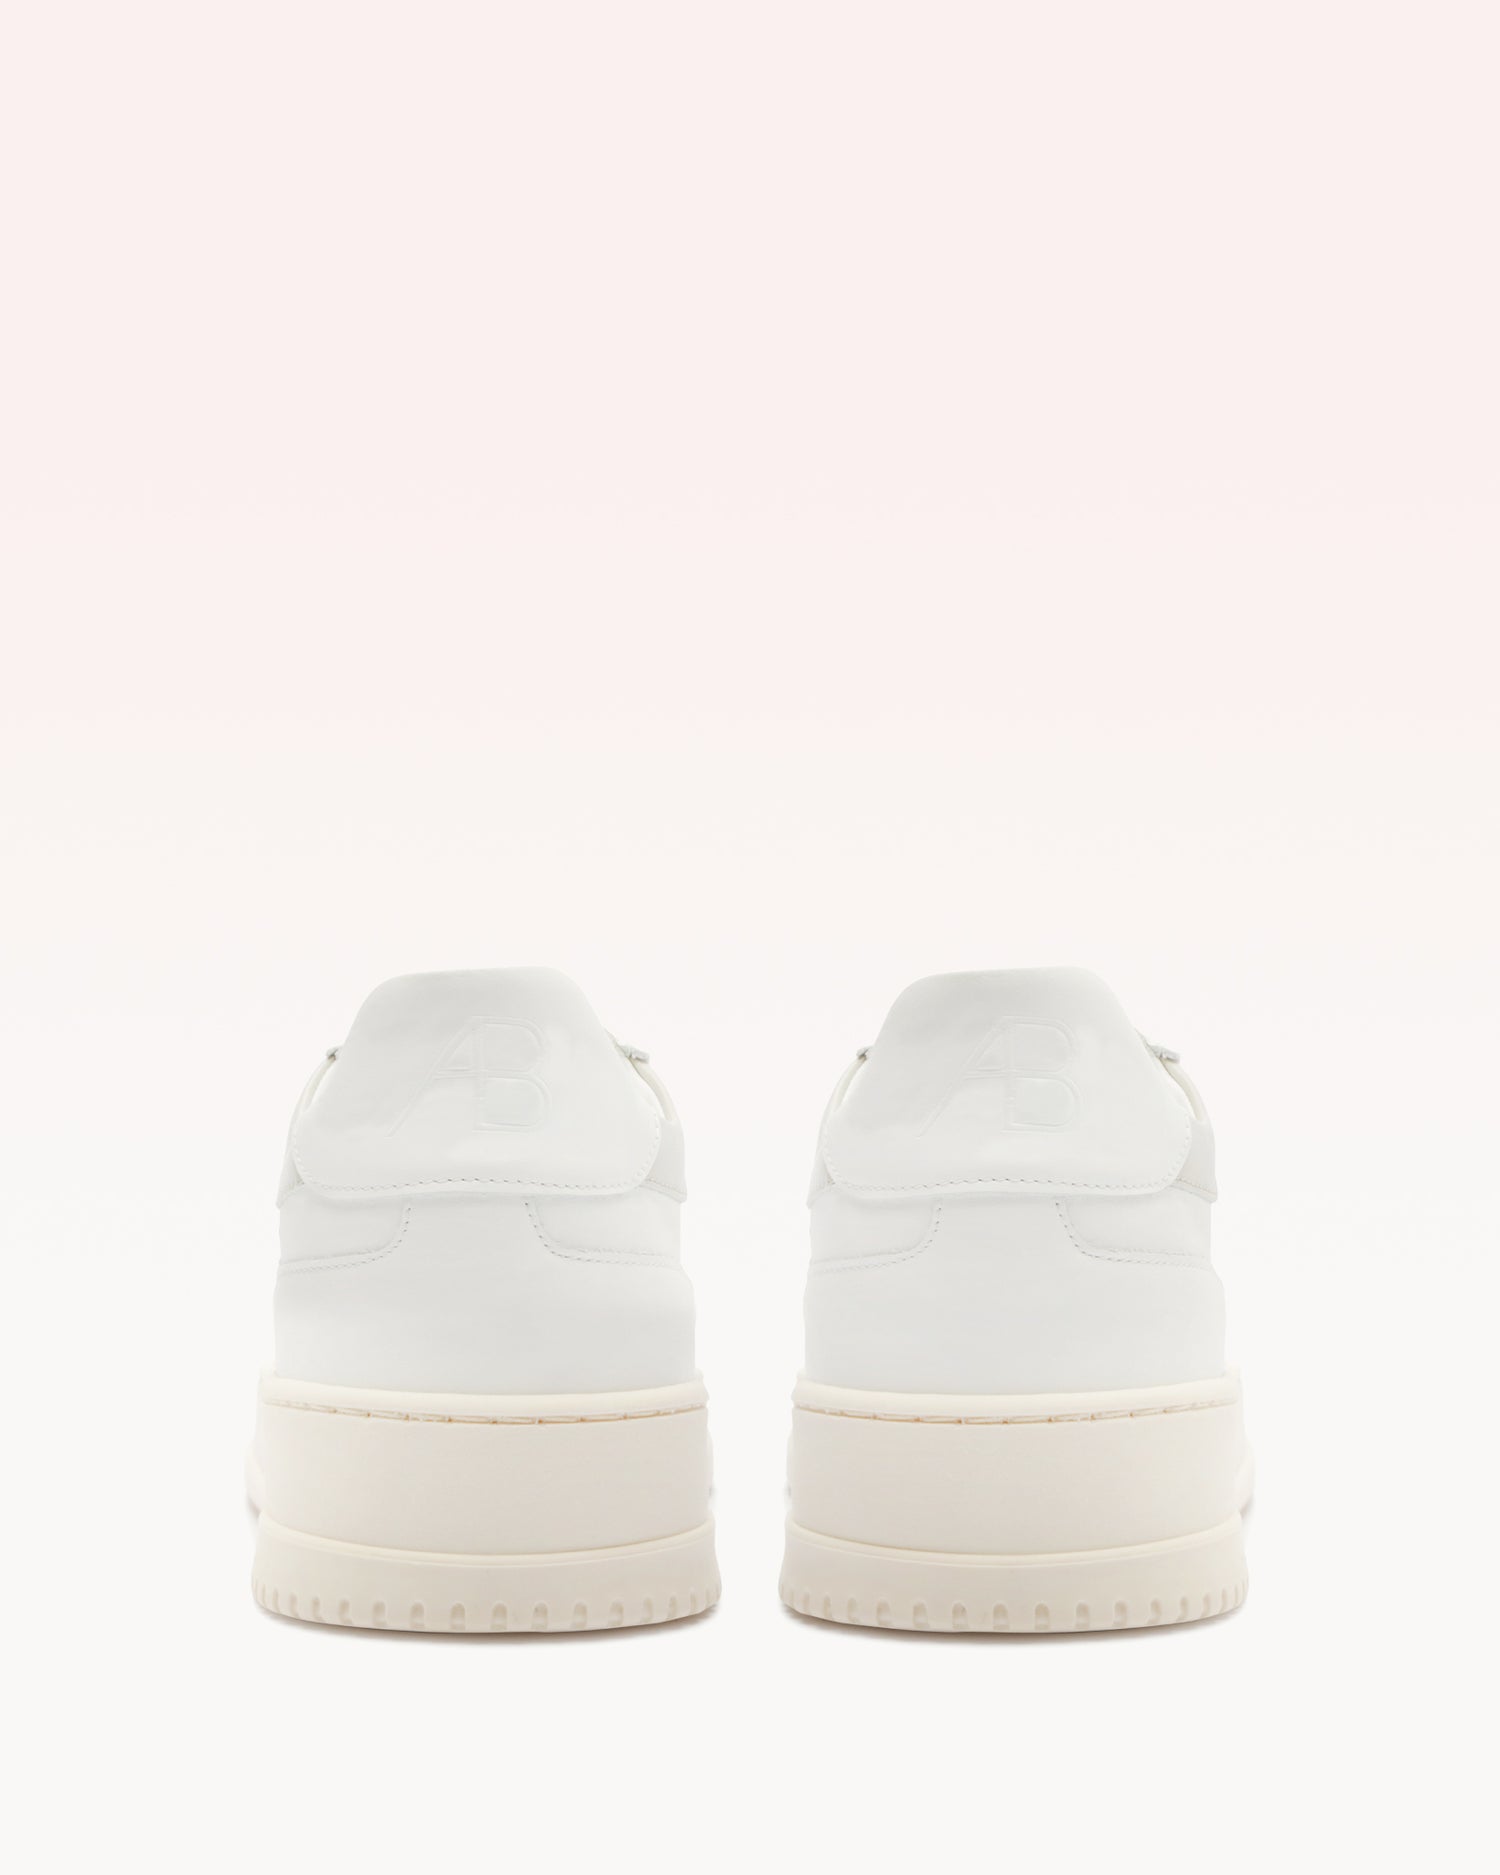 AB Sneaker White & Ice Sneakers S/24   